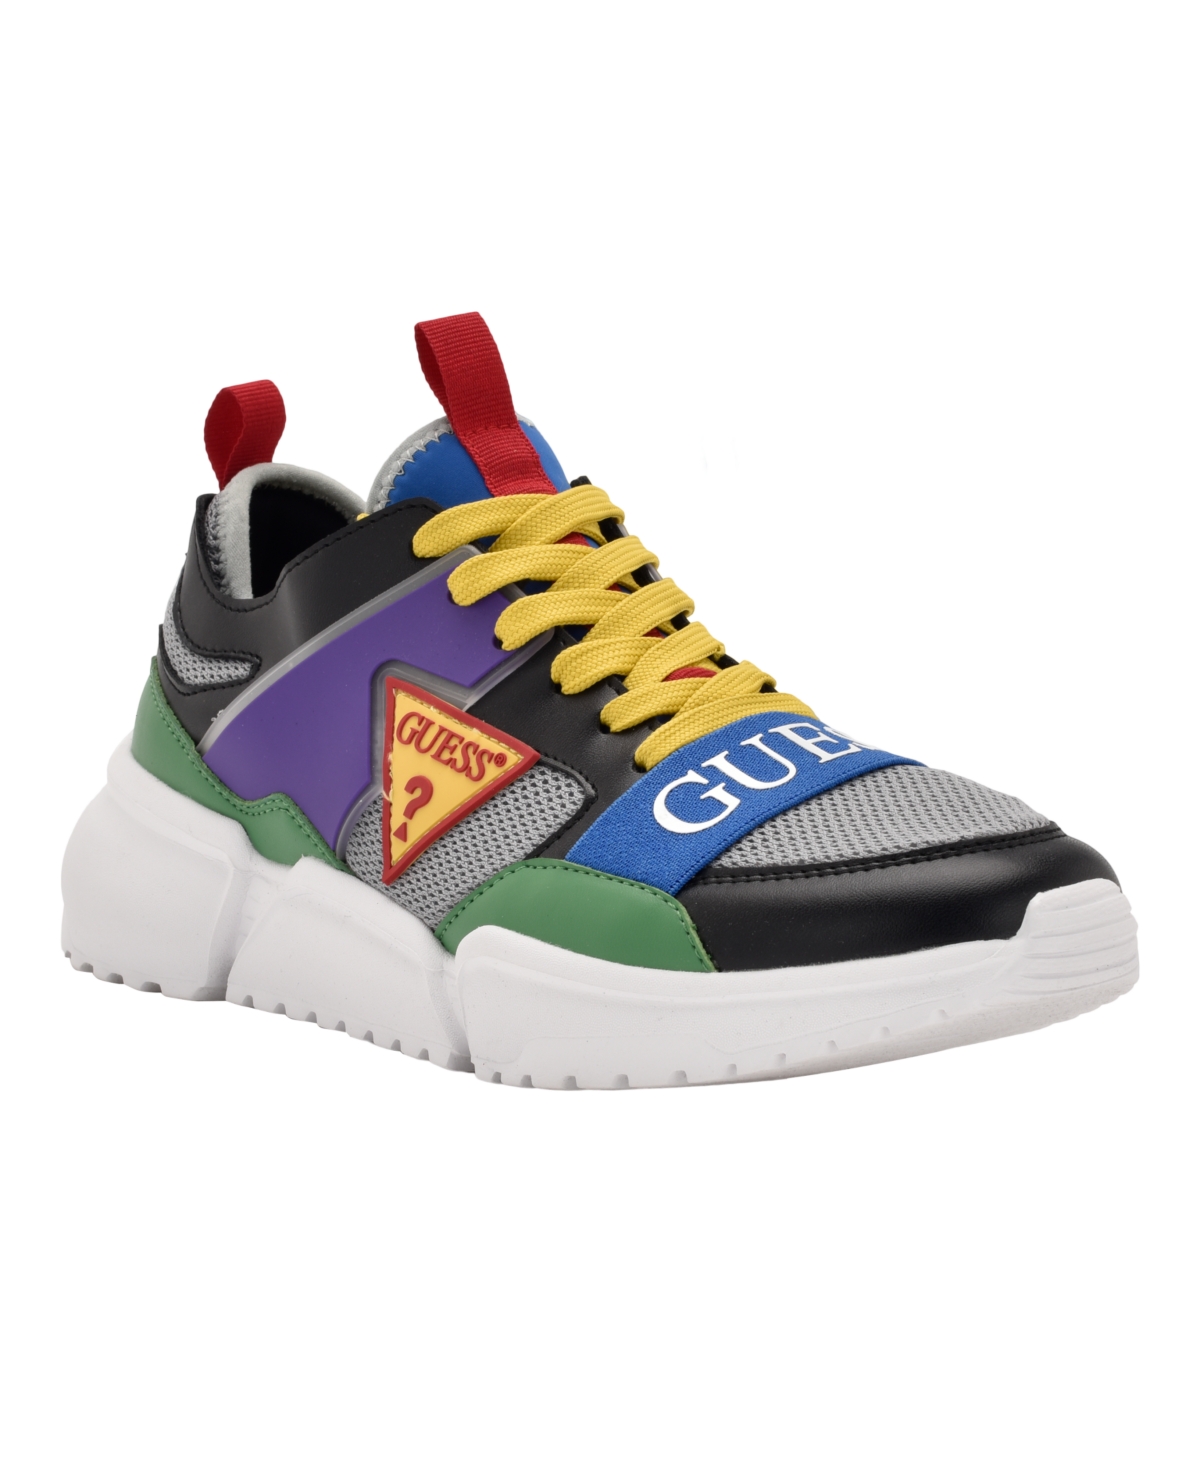 Men's Skillz Lace Up Fashion High Top Sneakers - Multi Color